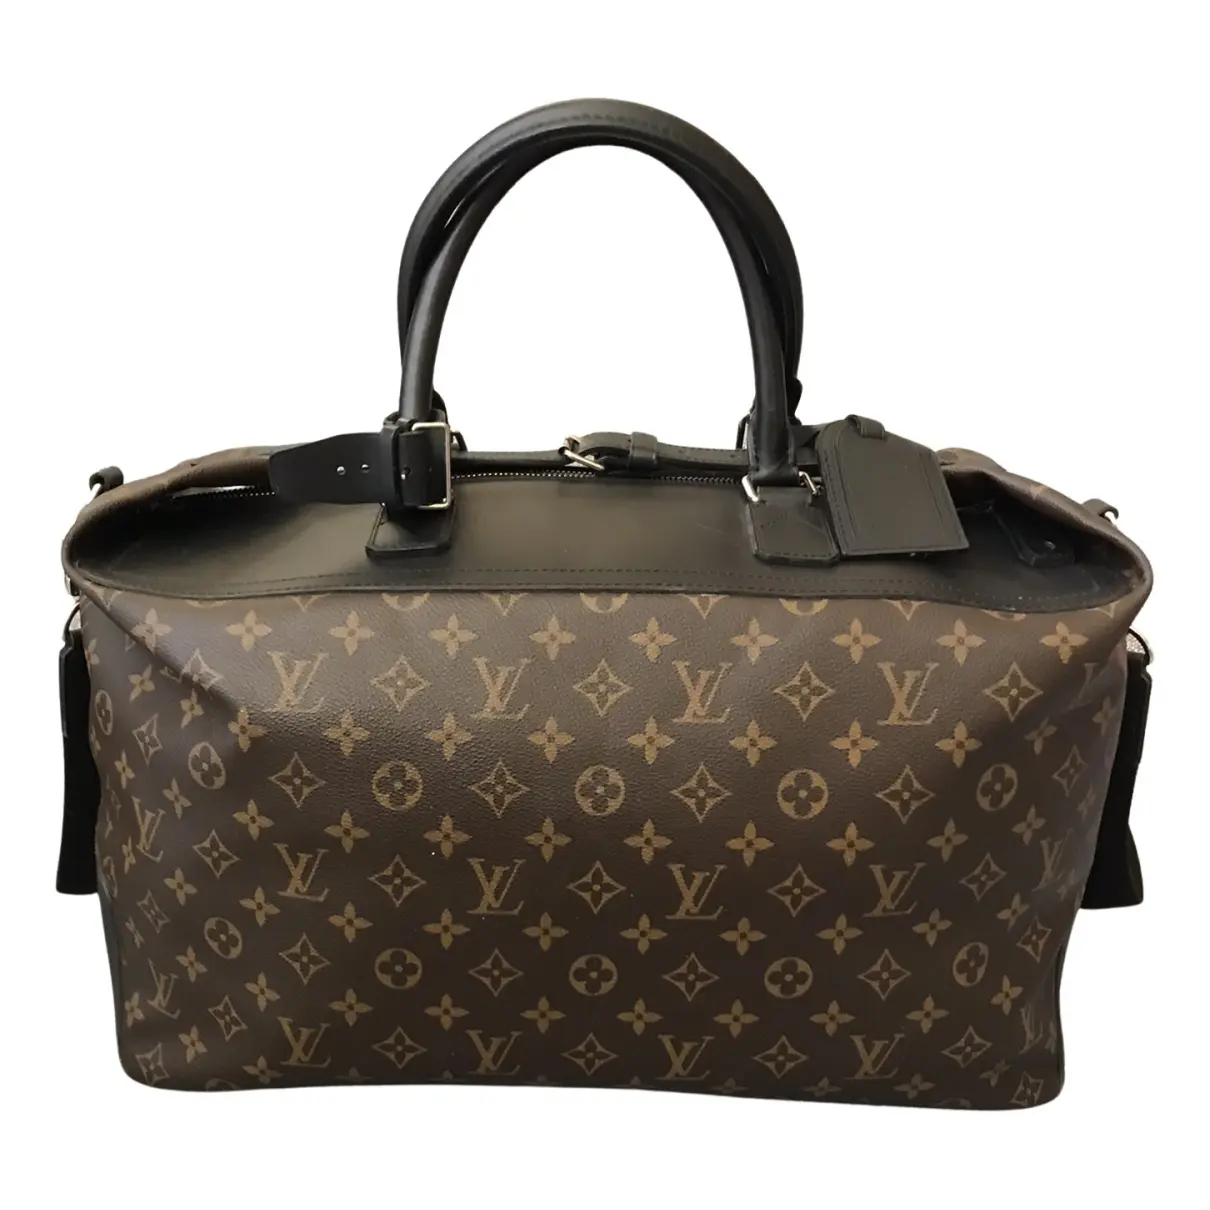 Neo Greenwich leather travel bag Louis Vuitton